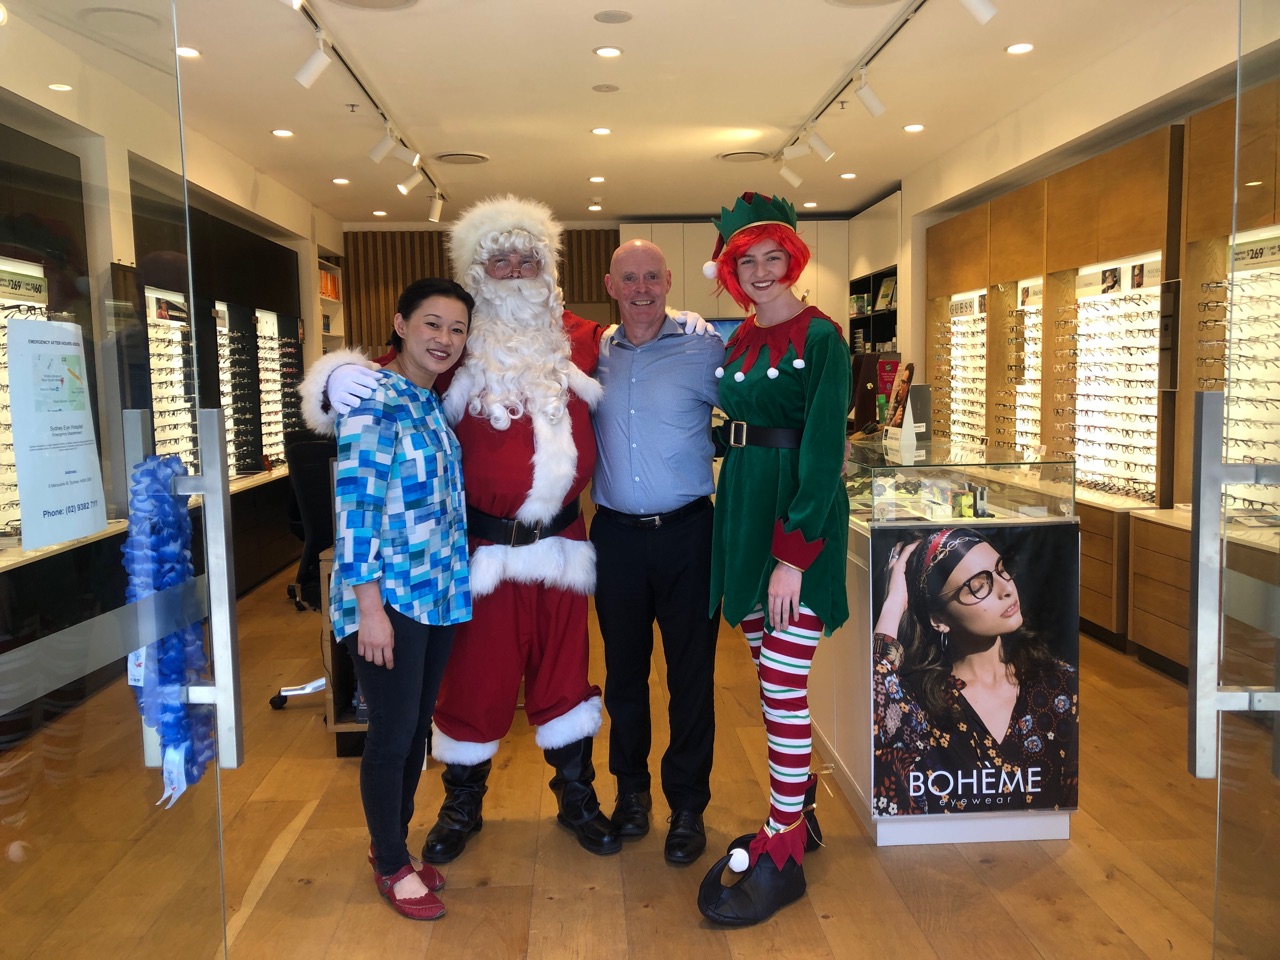 Left to right: Optometrist Dr SooJin, Santa, Qualified Optical Dispenser Mark and Lovely Elf Lady.